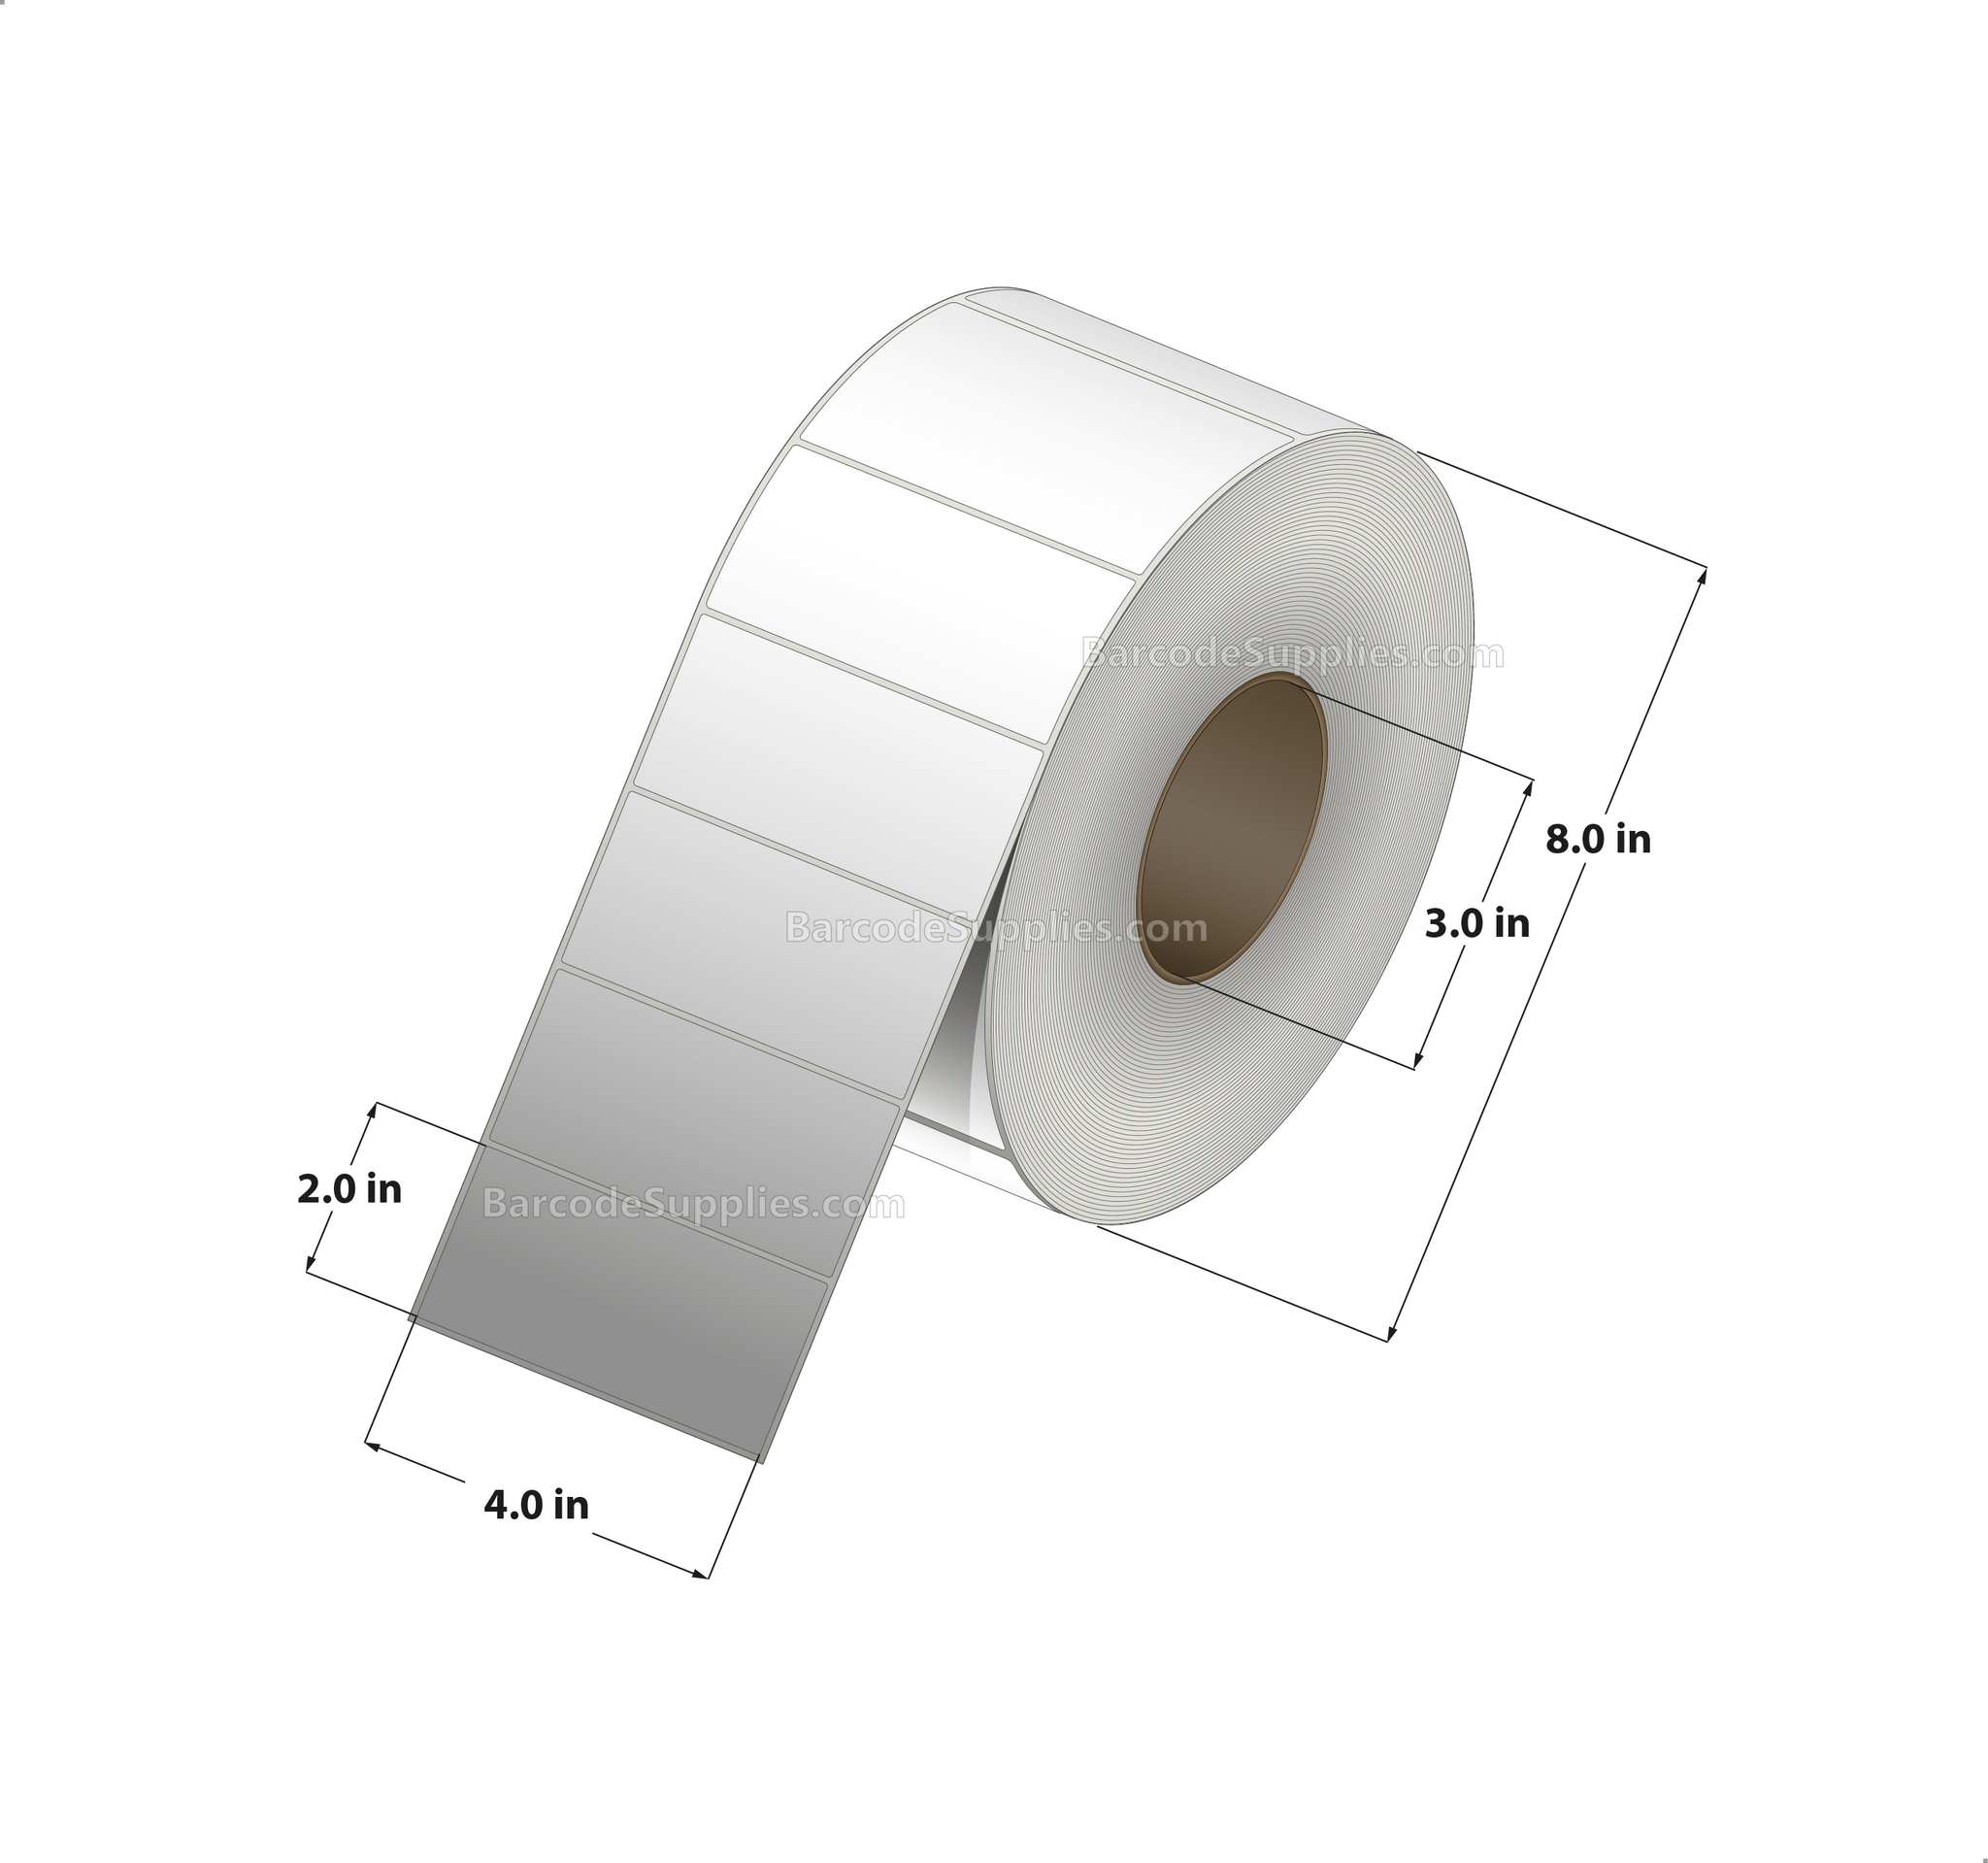 4 x 2 Thermal Transfer White Labels With Permanent Acrylic Adhesive - Not Perforated - 3000 Labels Per Roll - Carton Of 4 Rolls - 12000 Labels Total - MPN: TH42-1